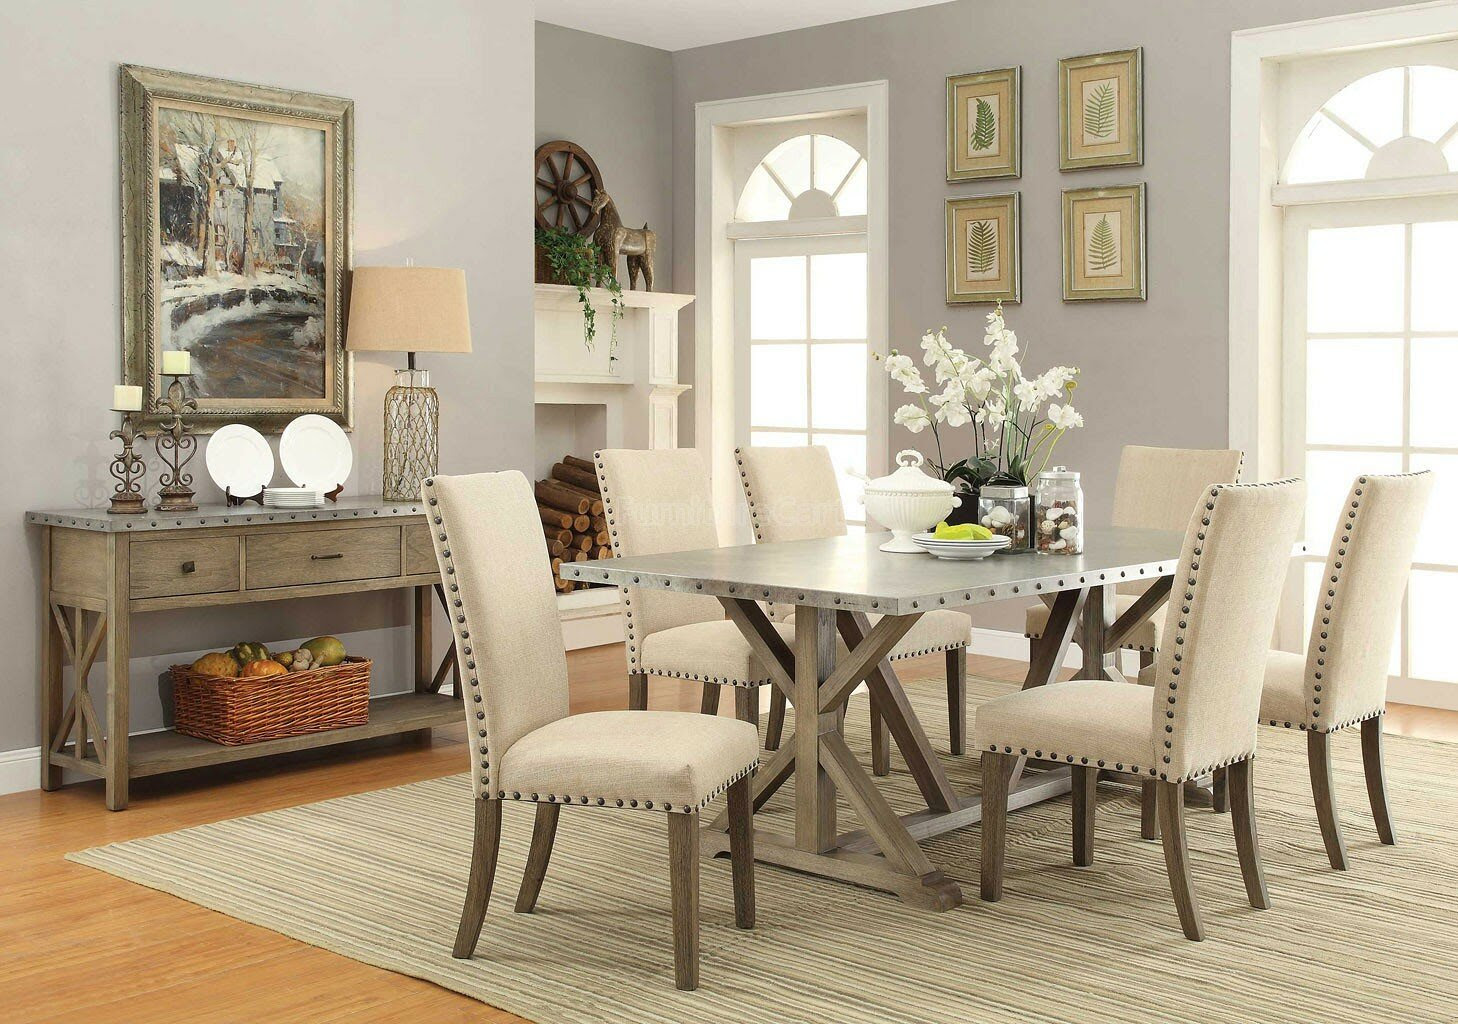 Tips To Save Money While Buying A Dining Room Sets Pickndecorcom